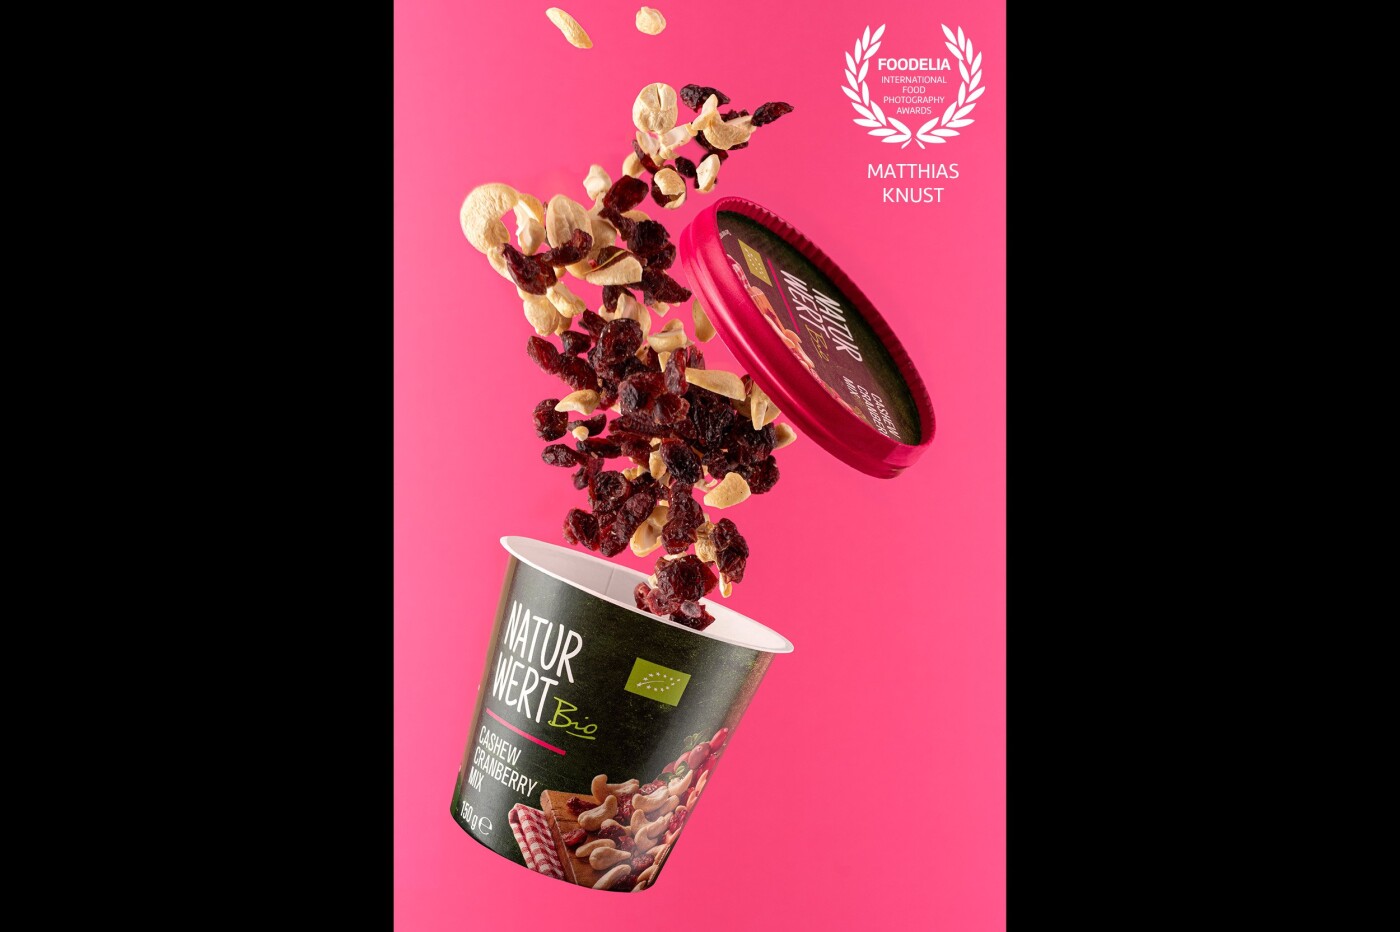 This moving image was acquired for an online campaign. The nuts and raisins should represent dynamism and freshness and contain a modern setting. Food photography from a minimalist perspective.